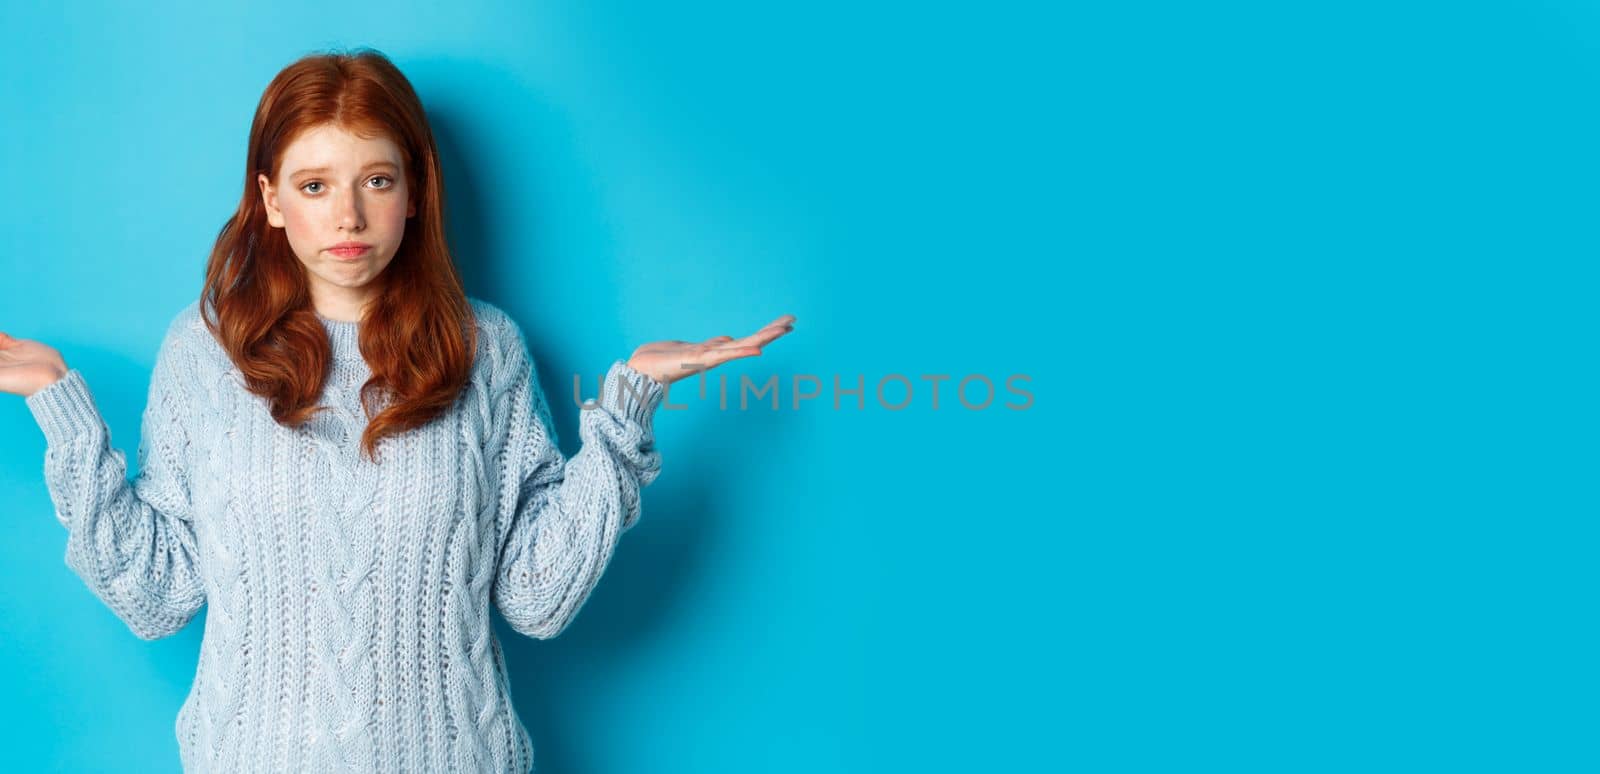 Clueless redhead girl shrugging and saying sorry, standing puzzled against blue background, have no idea.